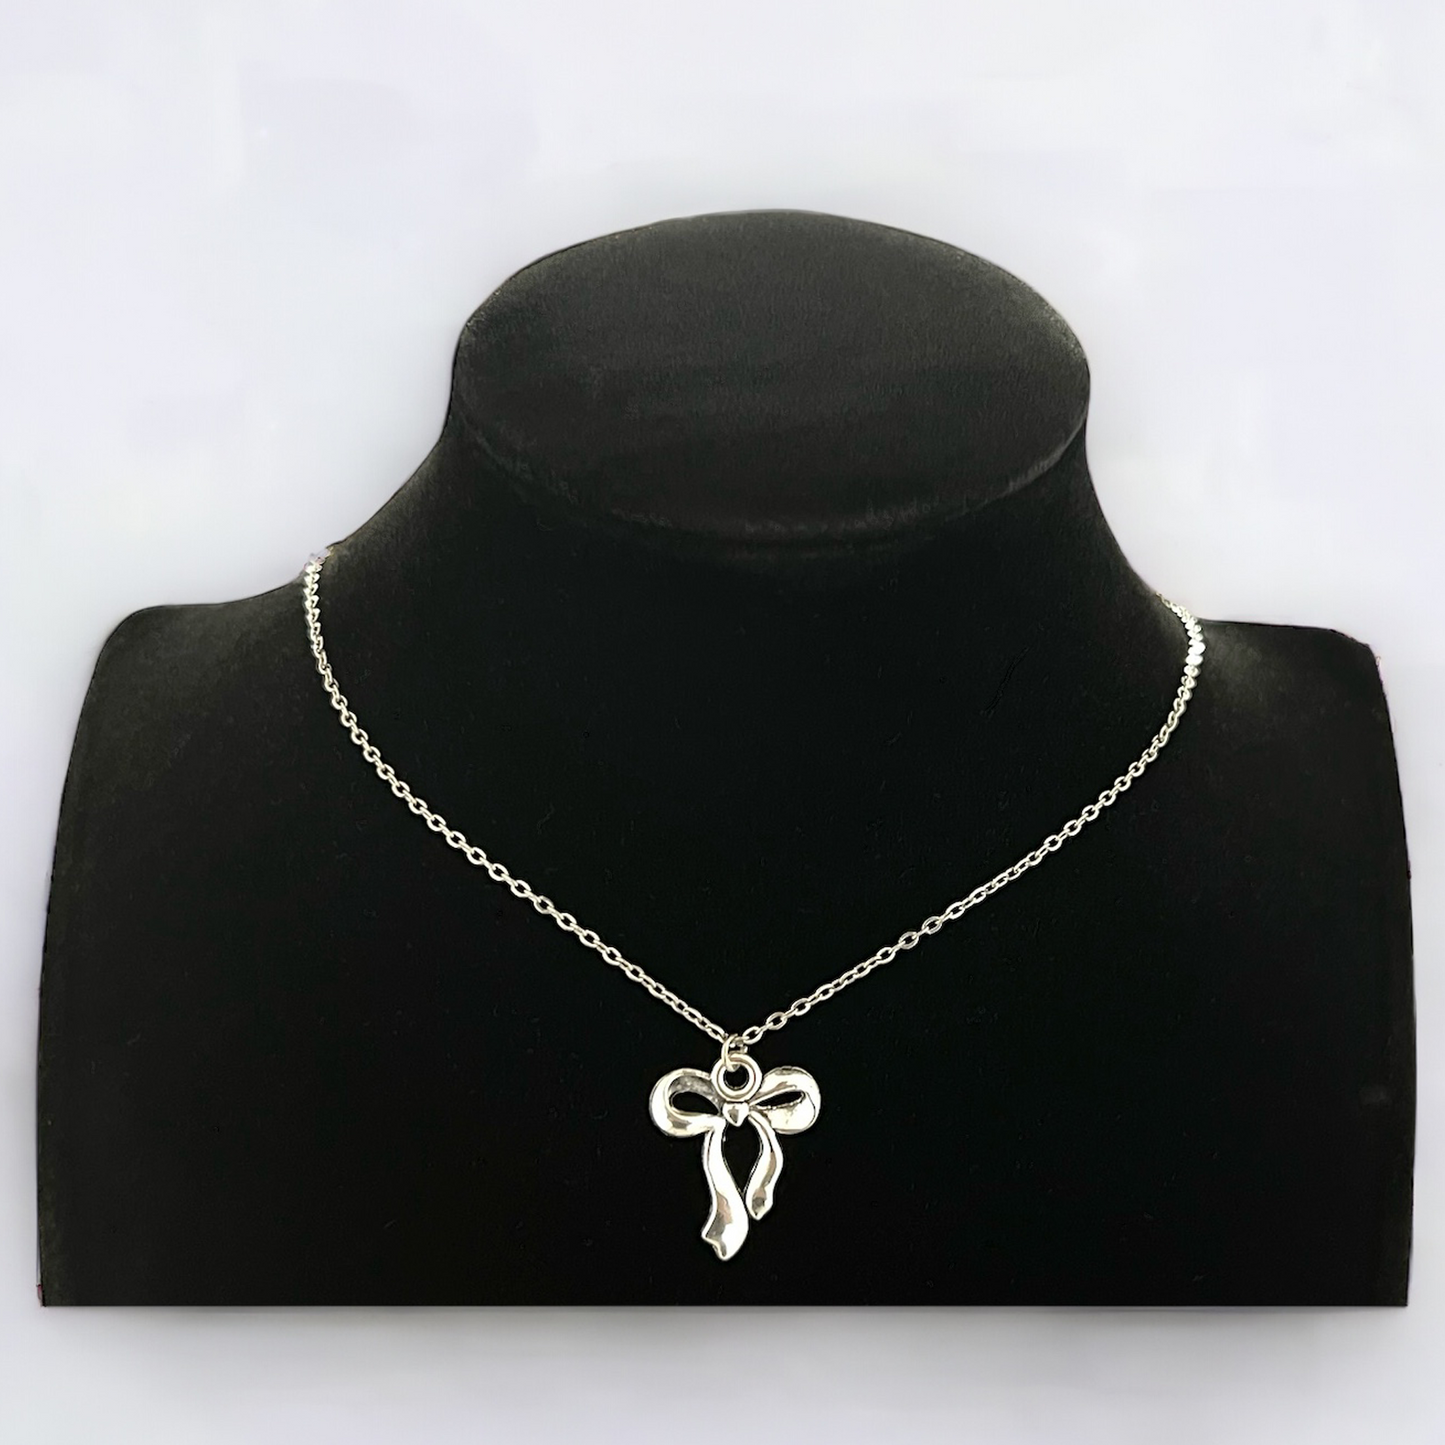 Ribbon Bow Necklace - Silver